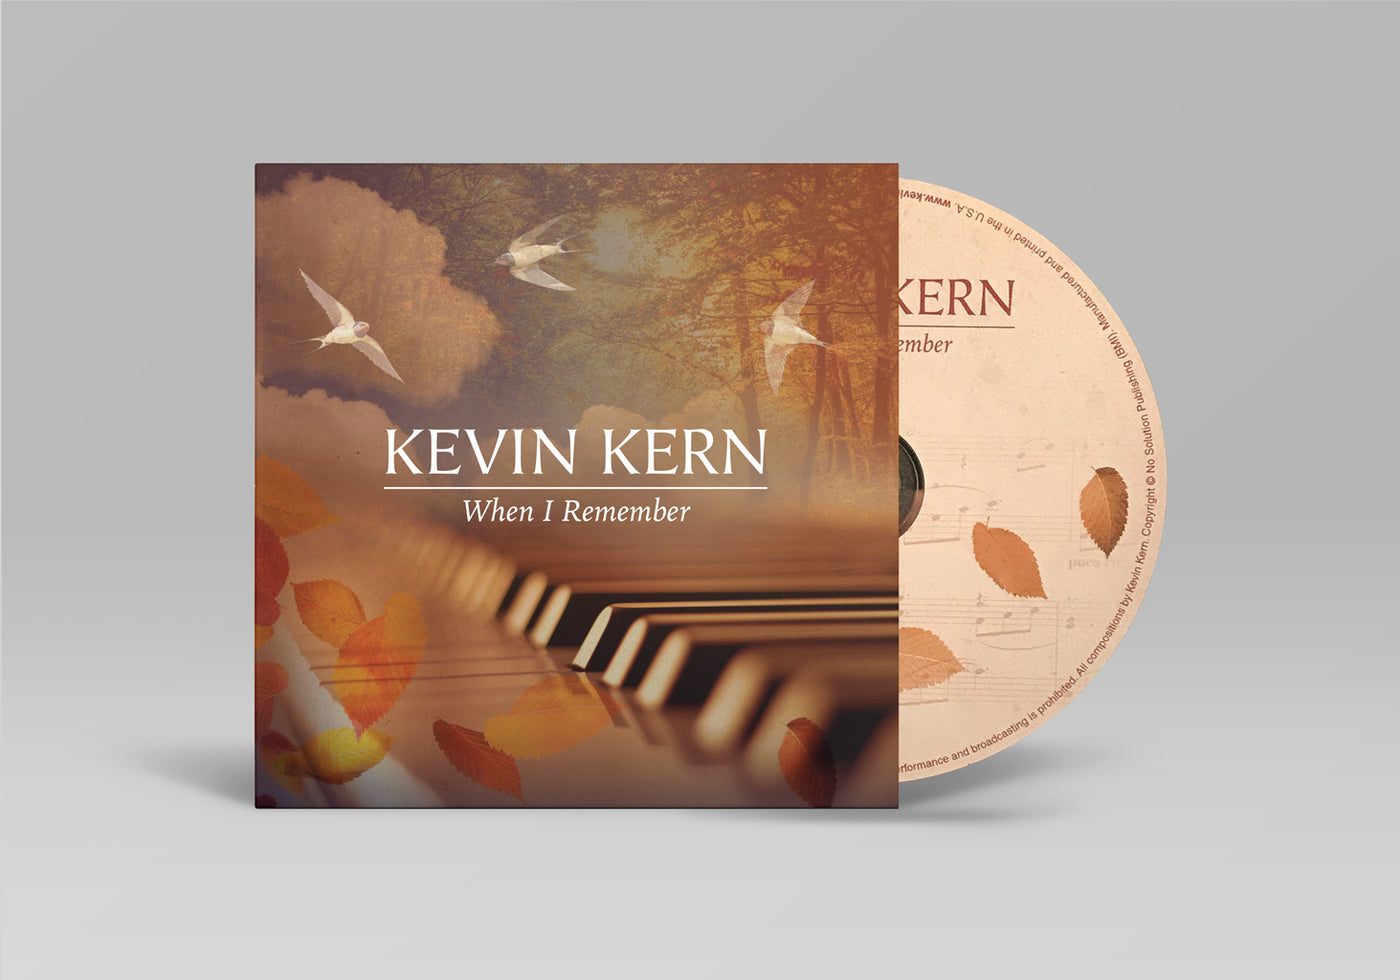 When I Remember by Kevin Kern, cd and cover.